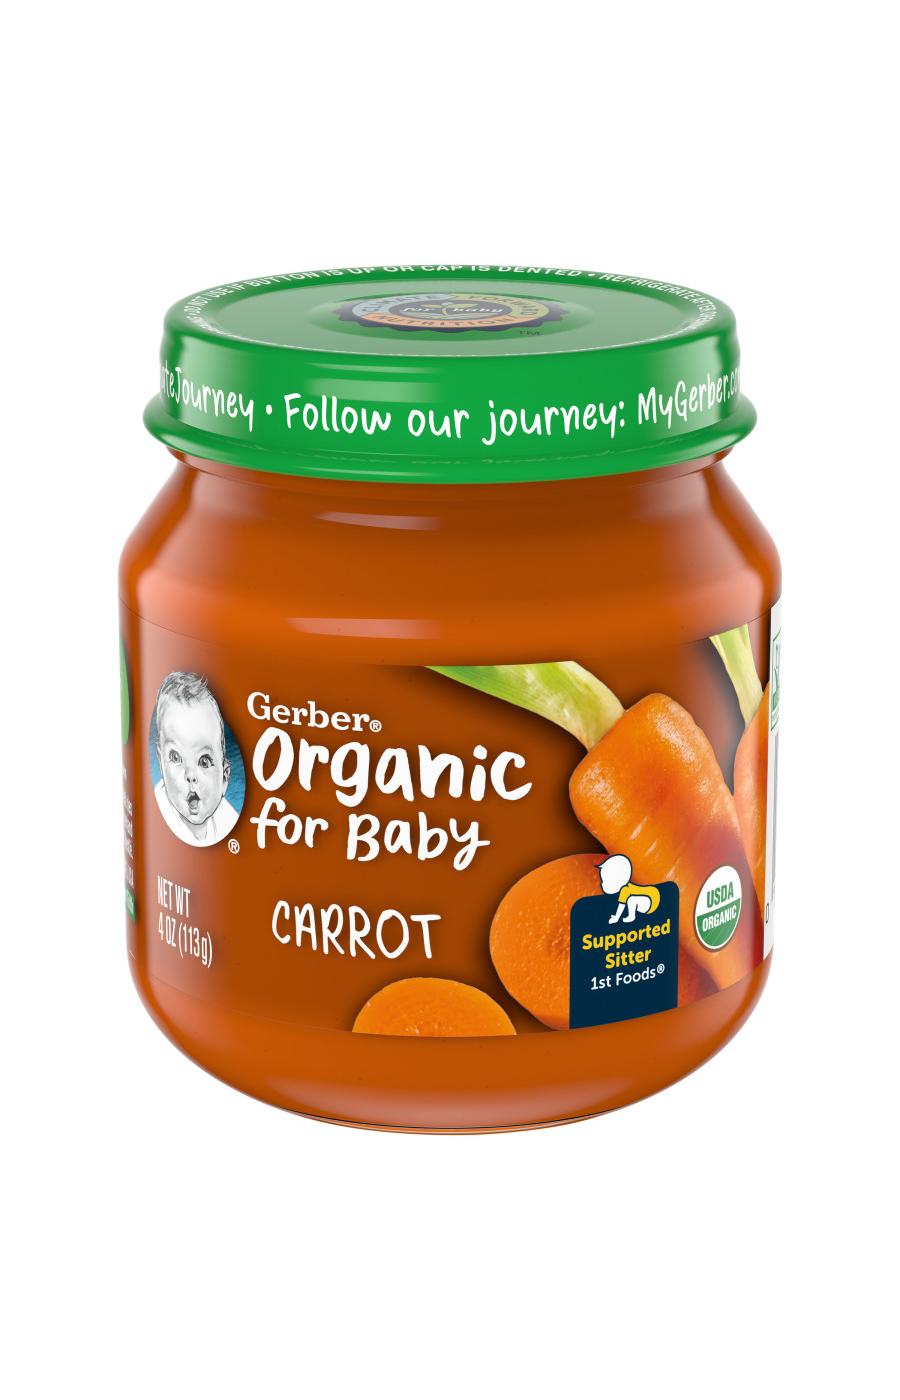 Gerber Organic for Baby 1st Foods - Carrot; image 1 of 8